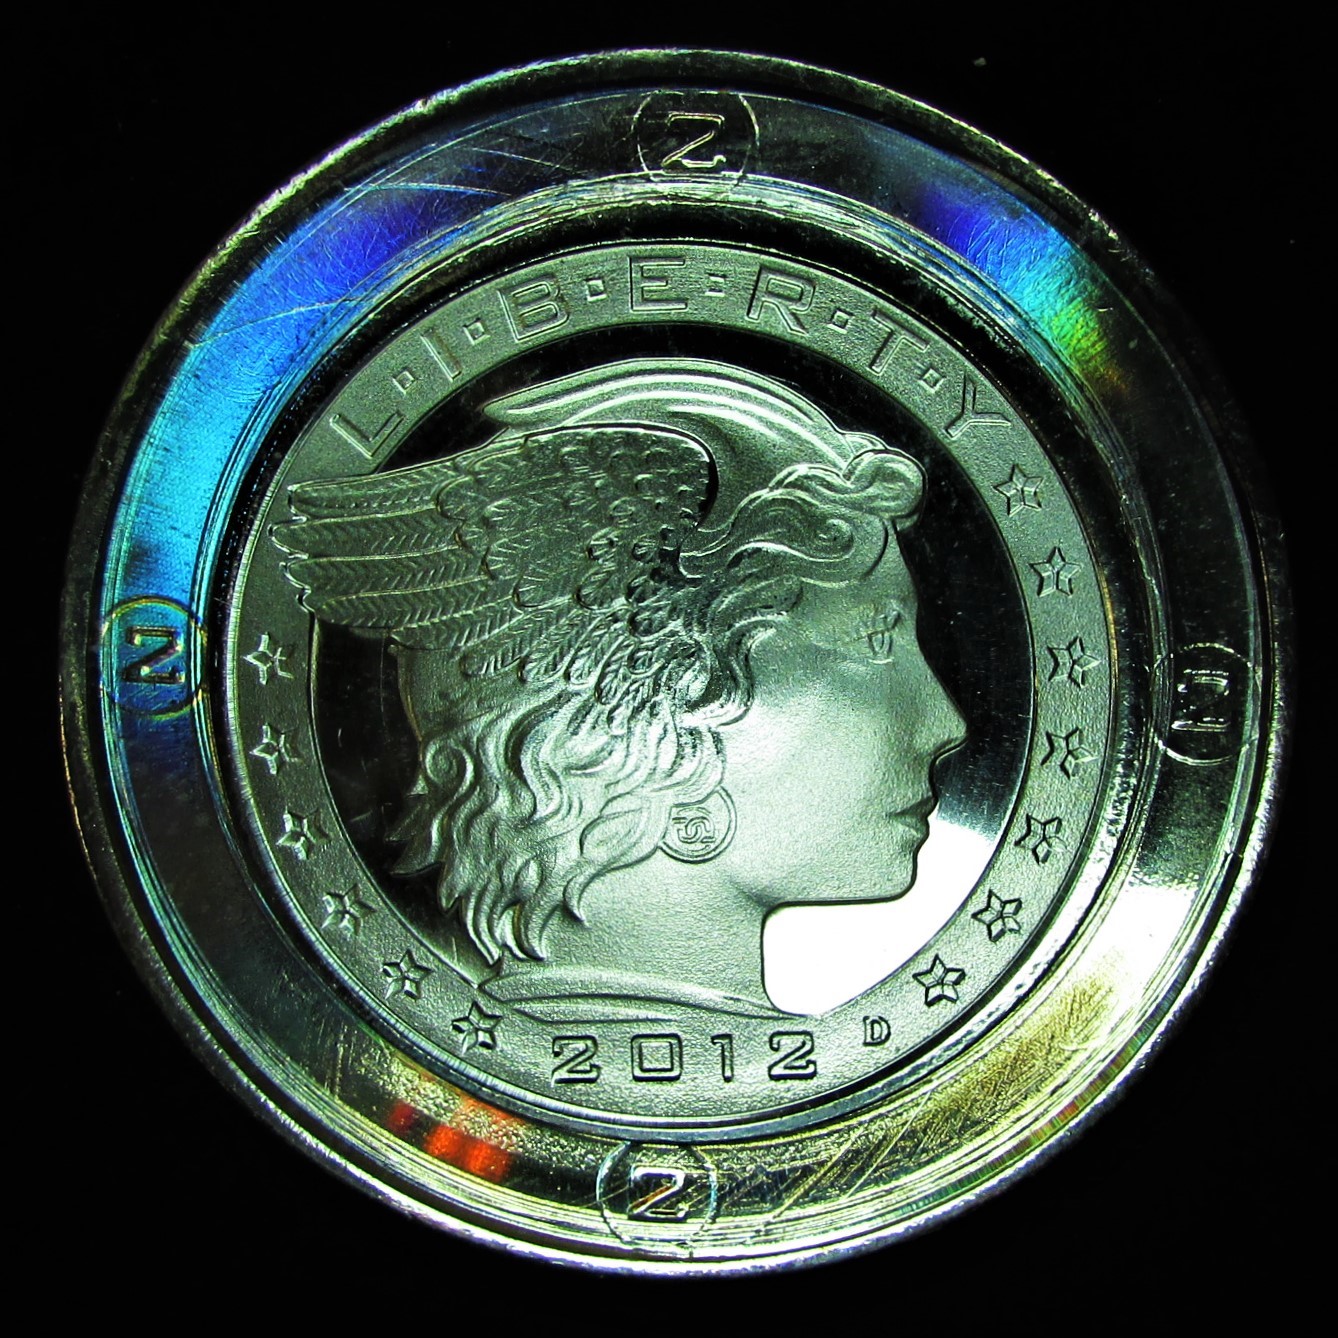 2012 USA Exchange Currency Concept - Holographic - obverse.JPG